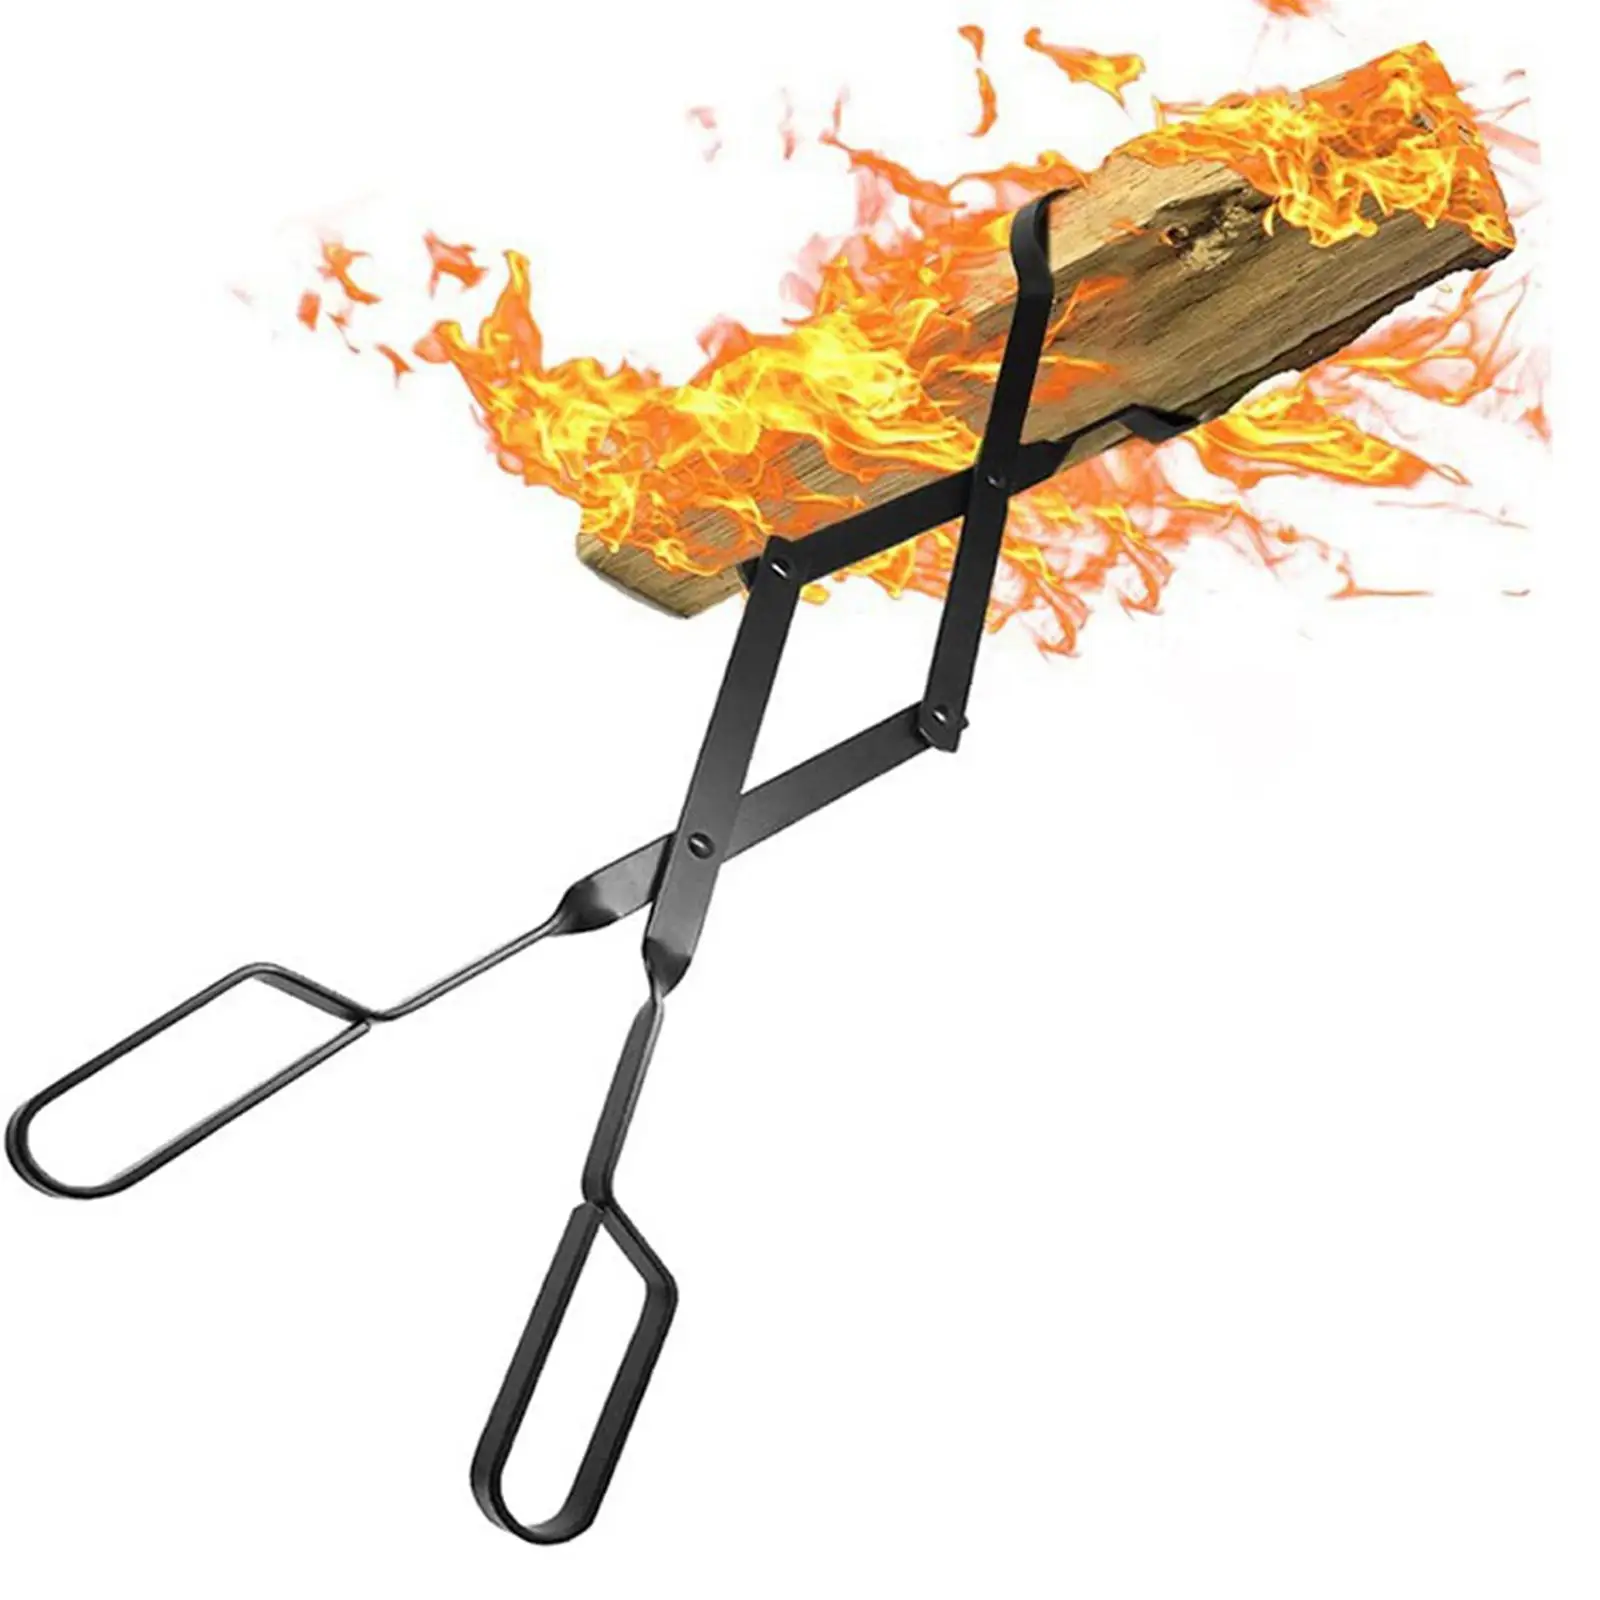 26inch Long Fireplace Tongs Clamp Clip Firewood Metal Log Grabber Log Claw Durable Heavy Duty Reinforced Wrought Iron , Black